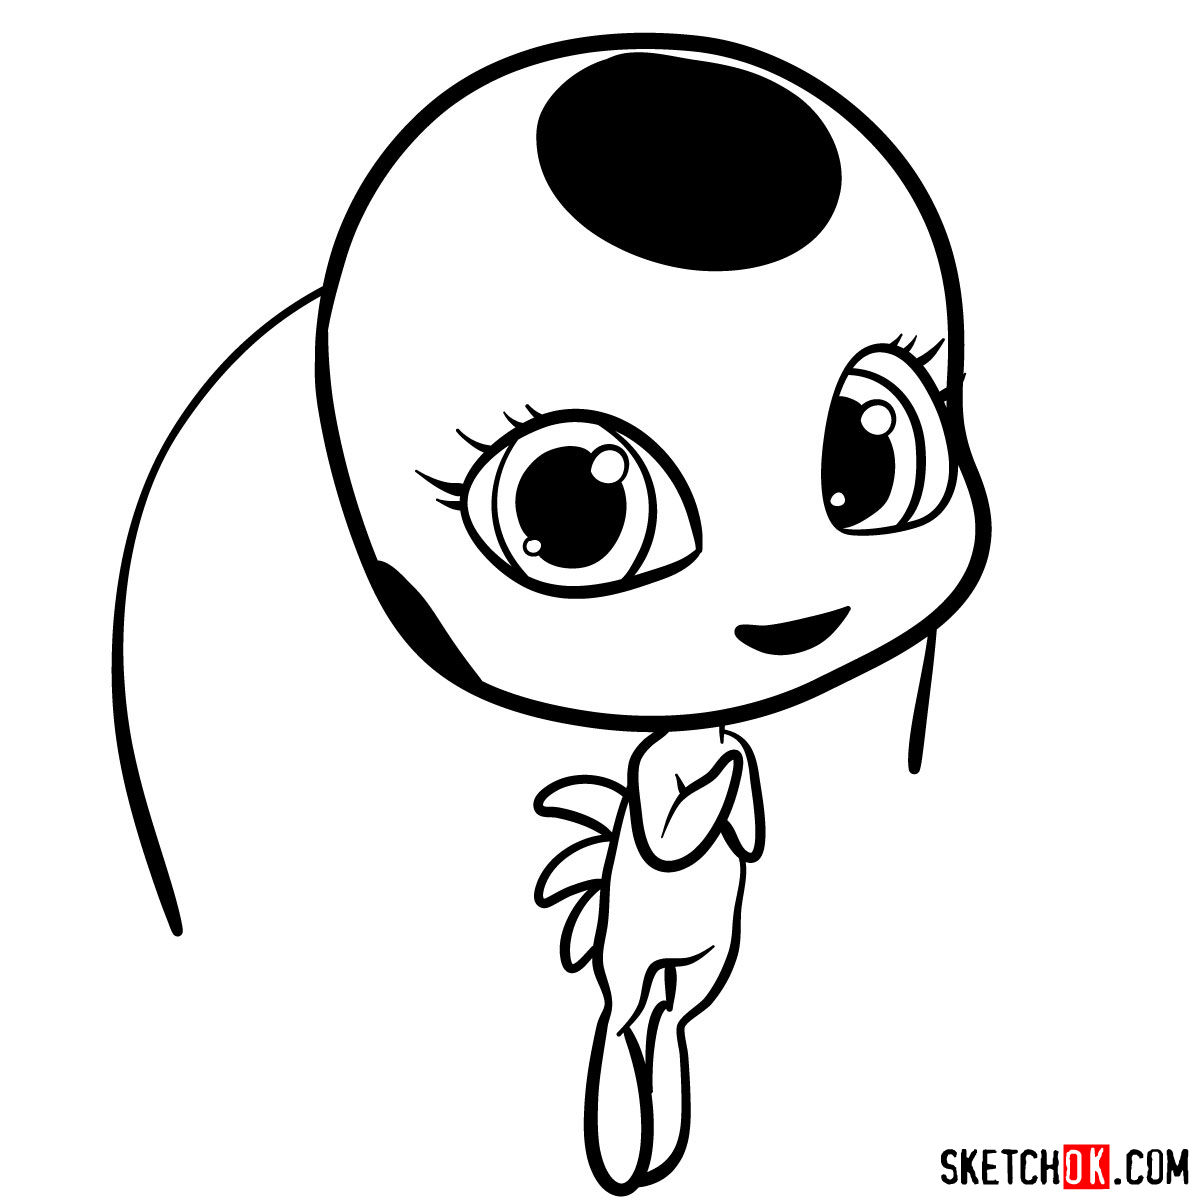 How to draw Tikki from Ladybug and Cat Noir - Sketchok easy drawing guides